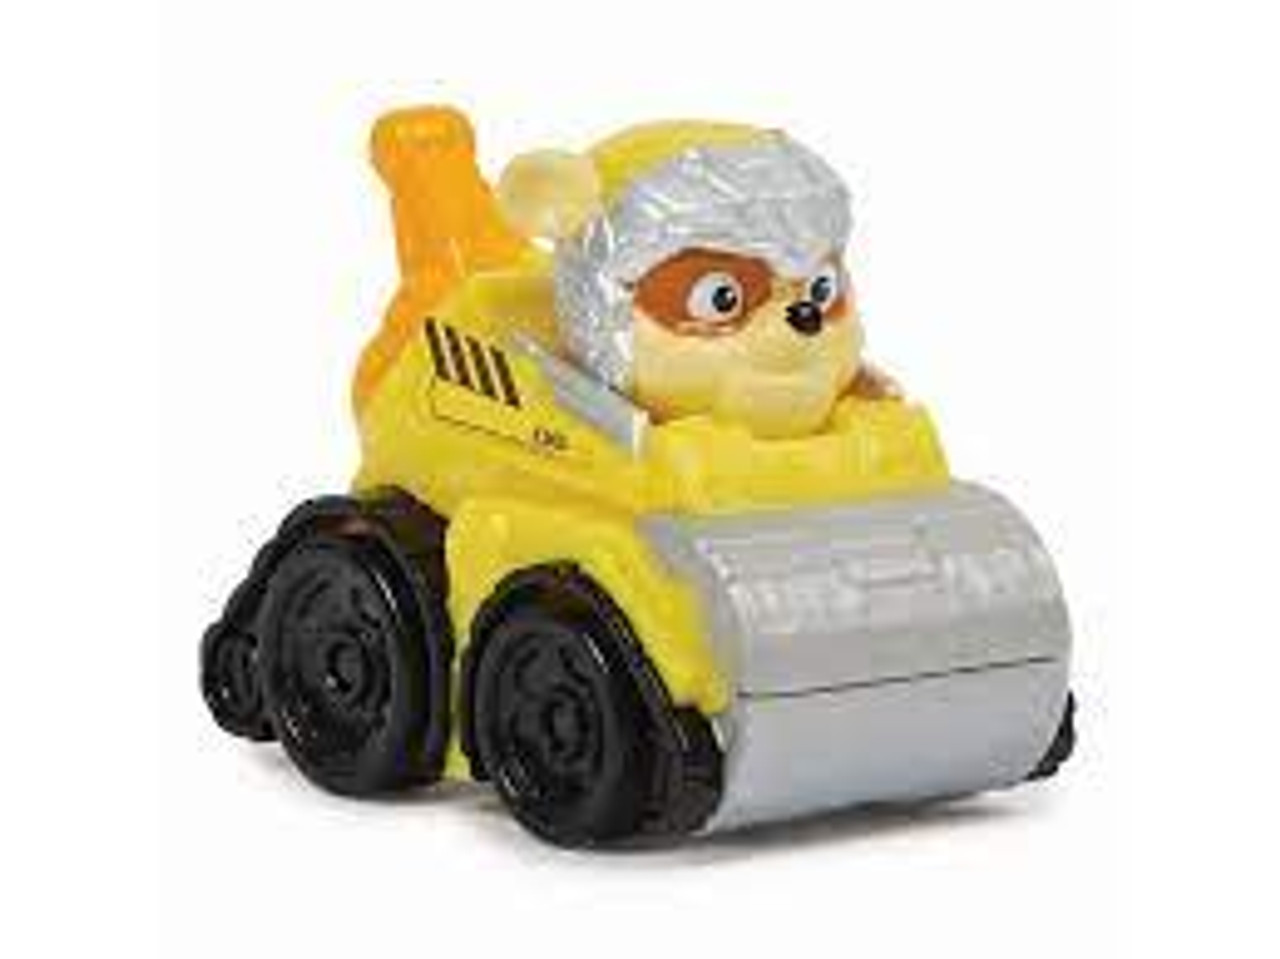 PAW PATROL MIGHTY MOVIE PUP SQUAD RACERS